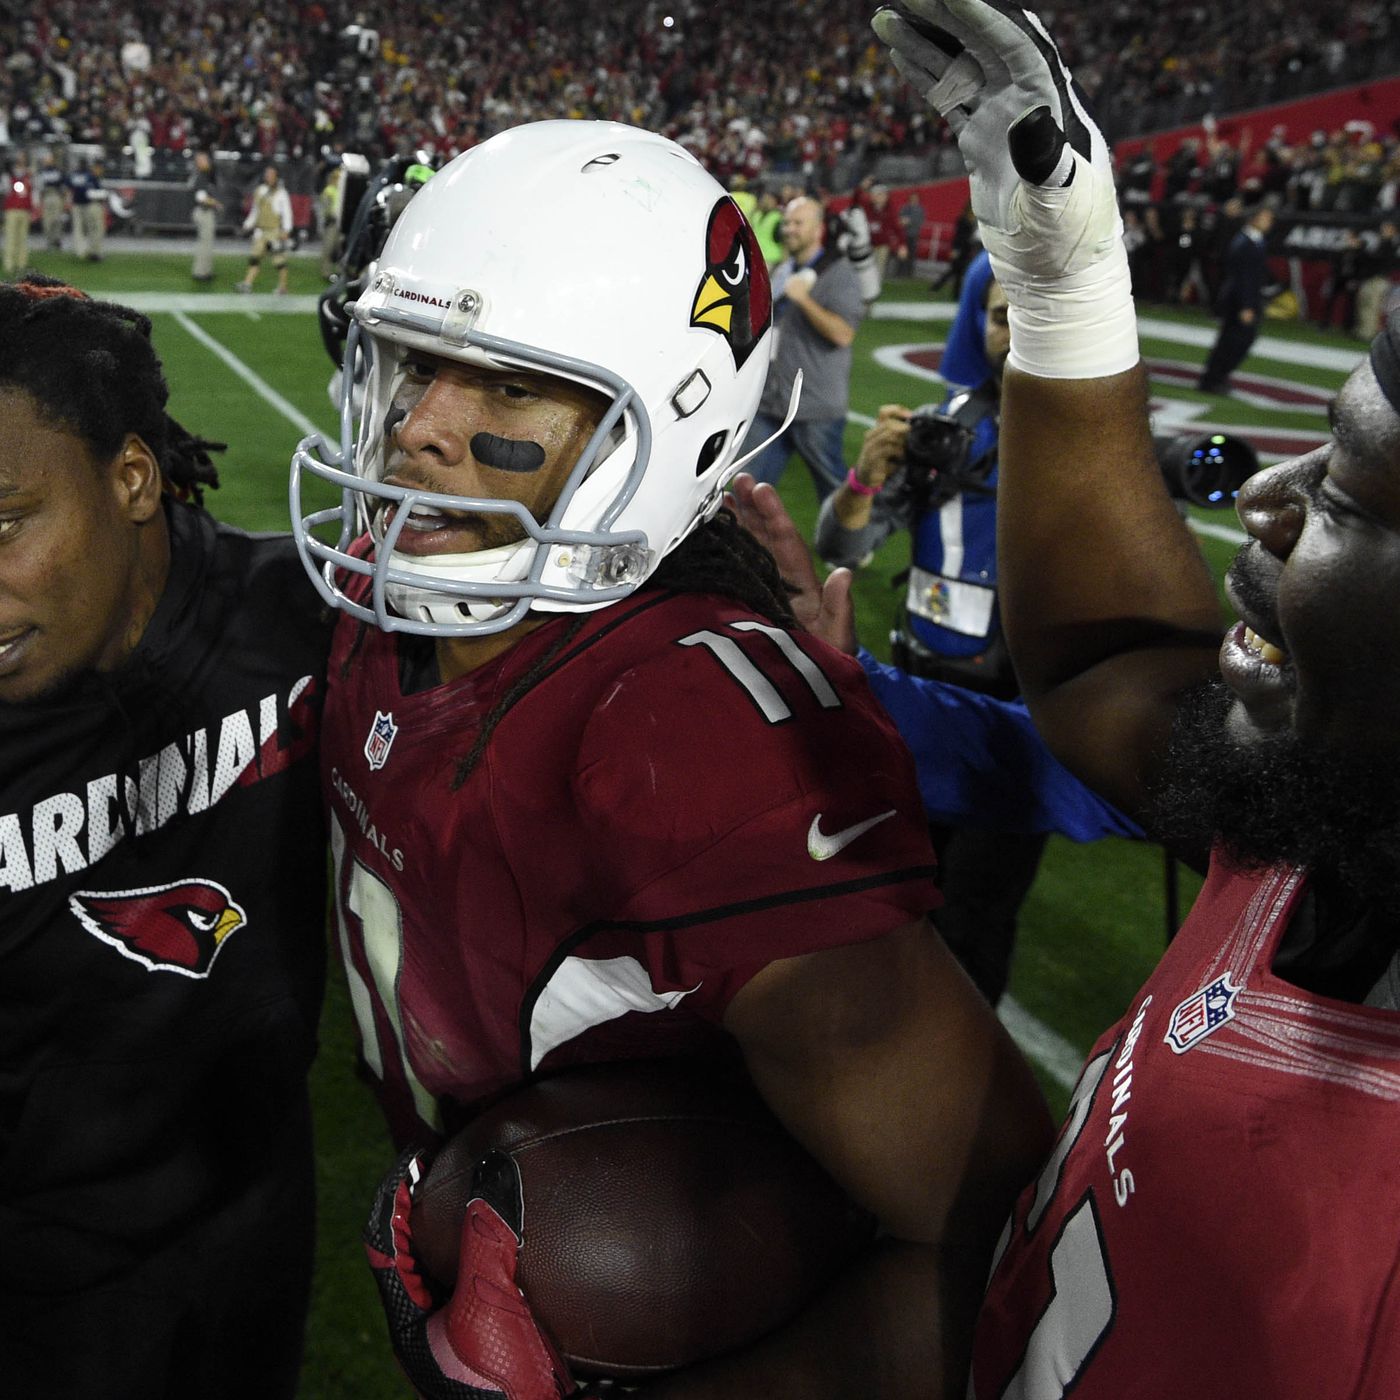 Should Larry Fitzgerald, already a lock for Ring of Honor and Hall of Fame,  be in the Ring now? - Revenge of the Birds